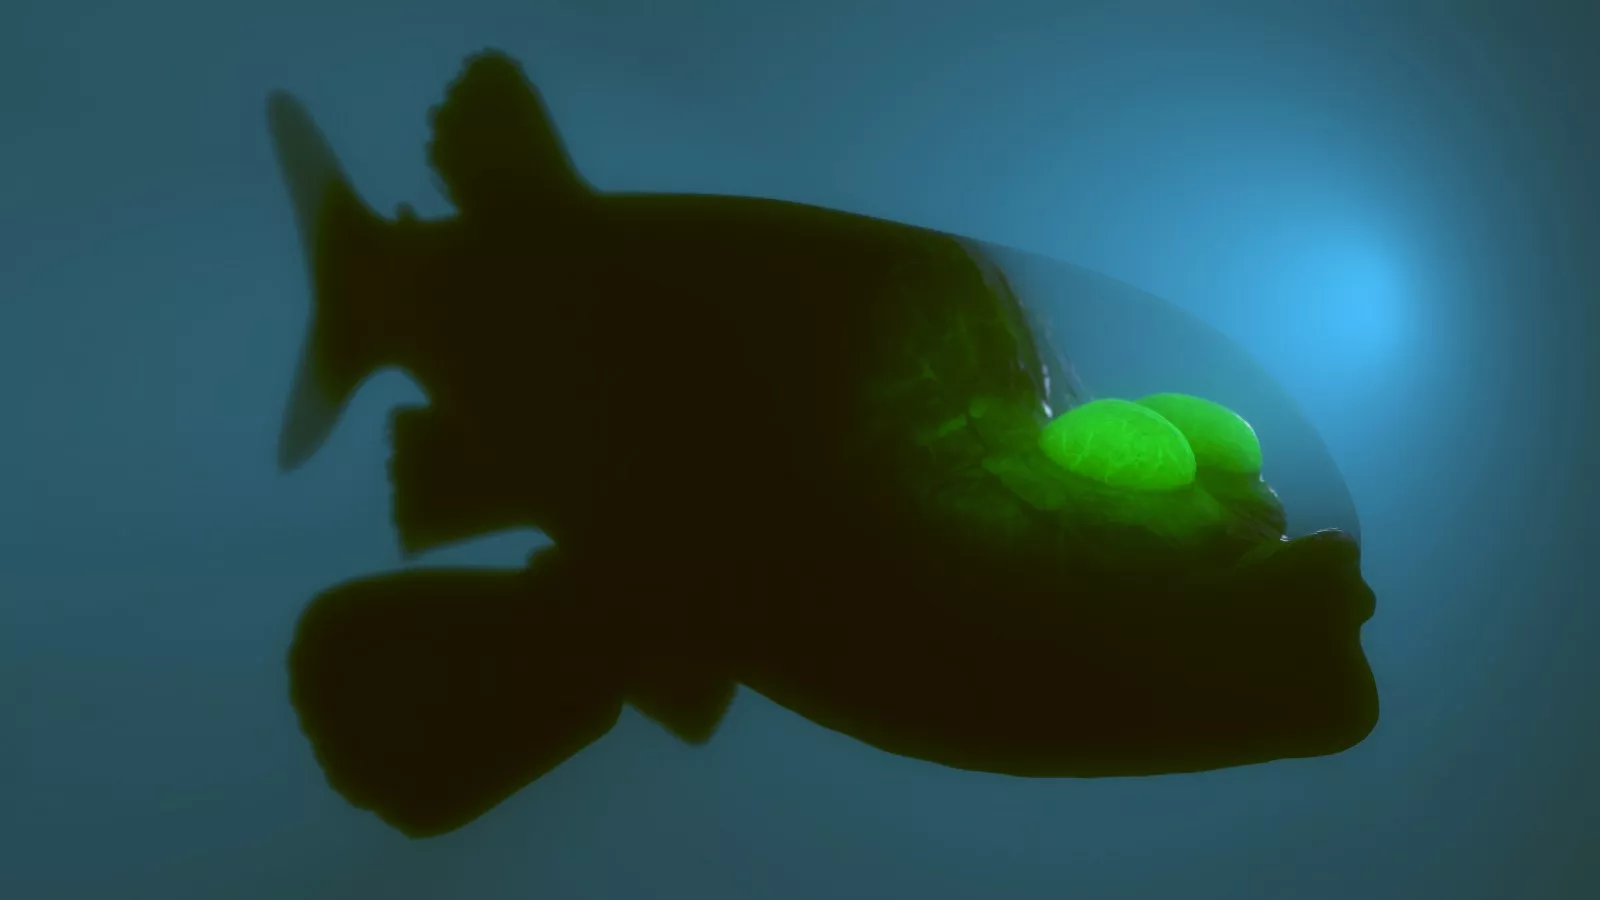 Bizarre and Rarely Seen Fish with Translucent Head and Glowing